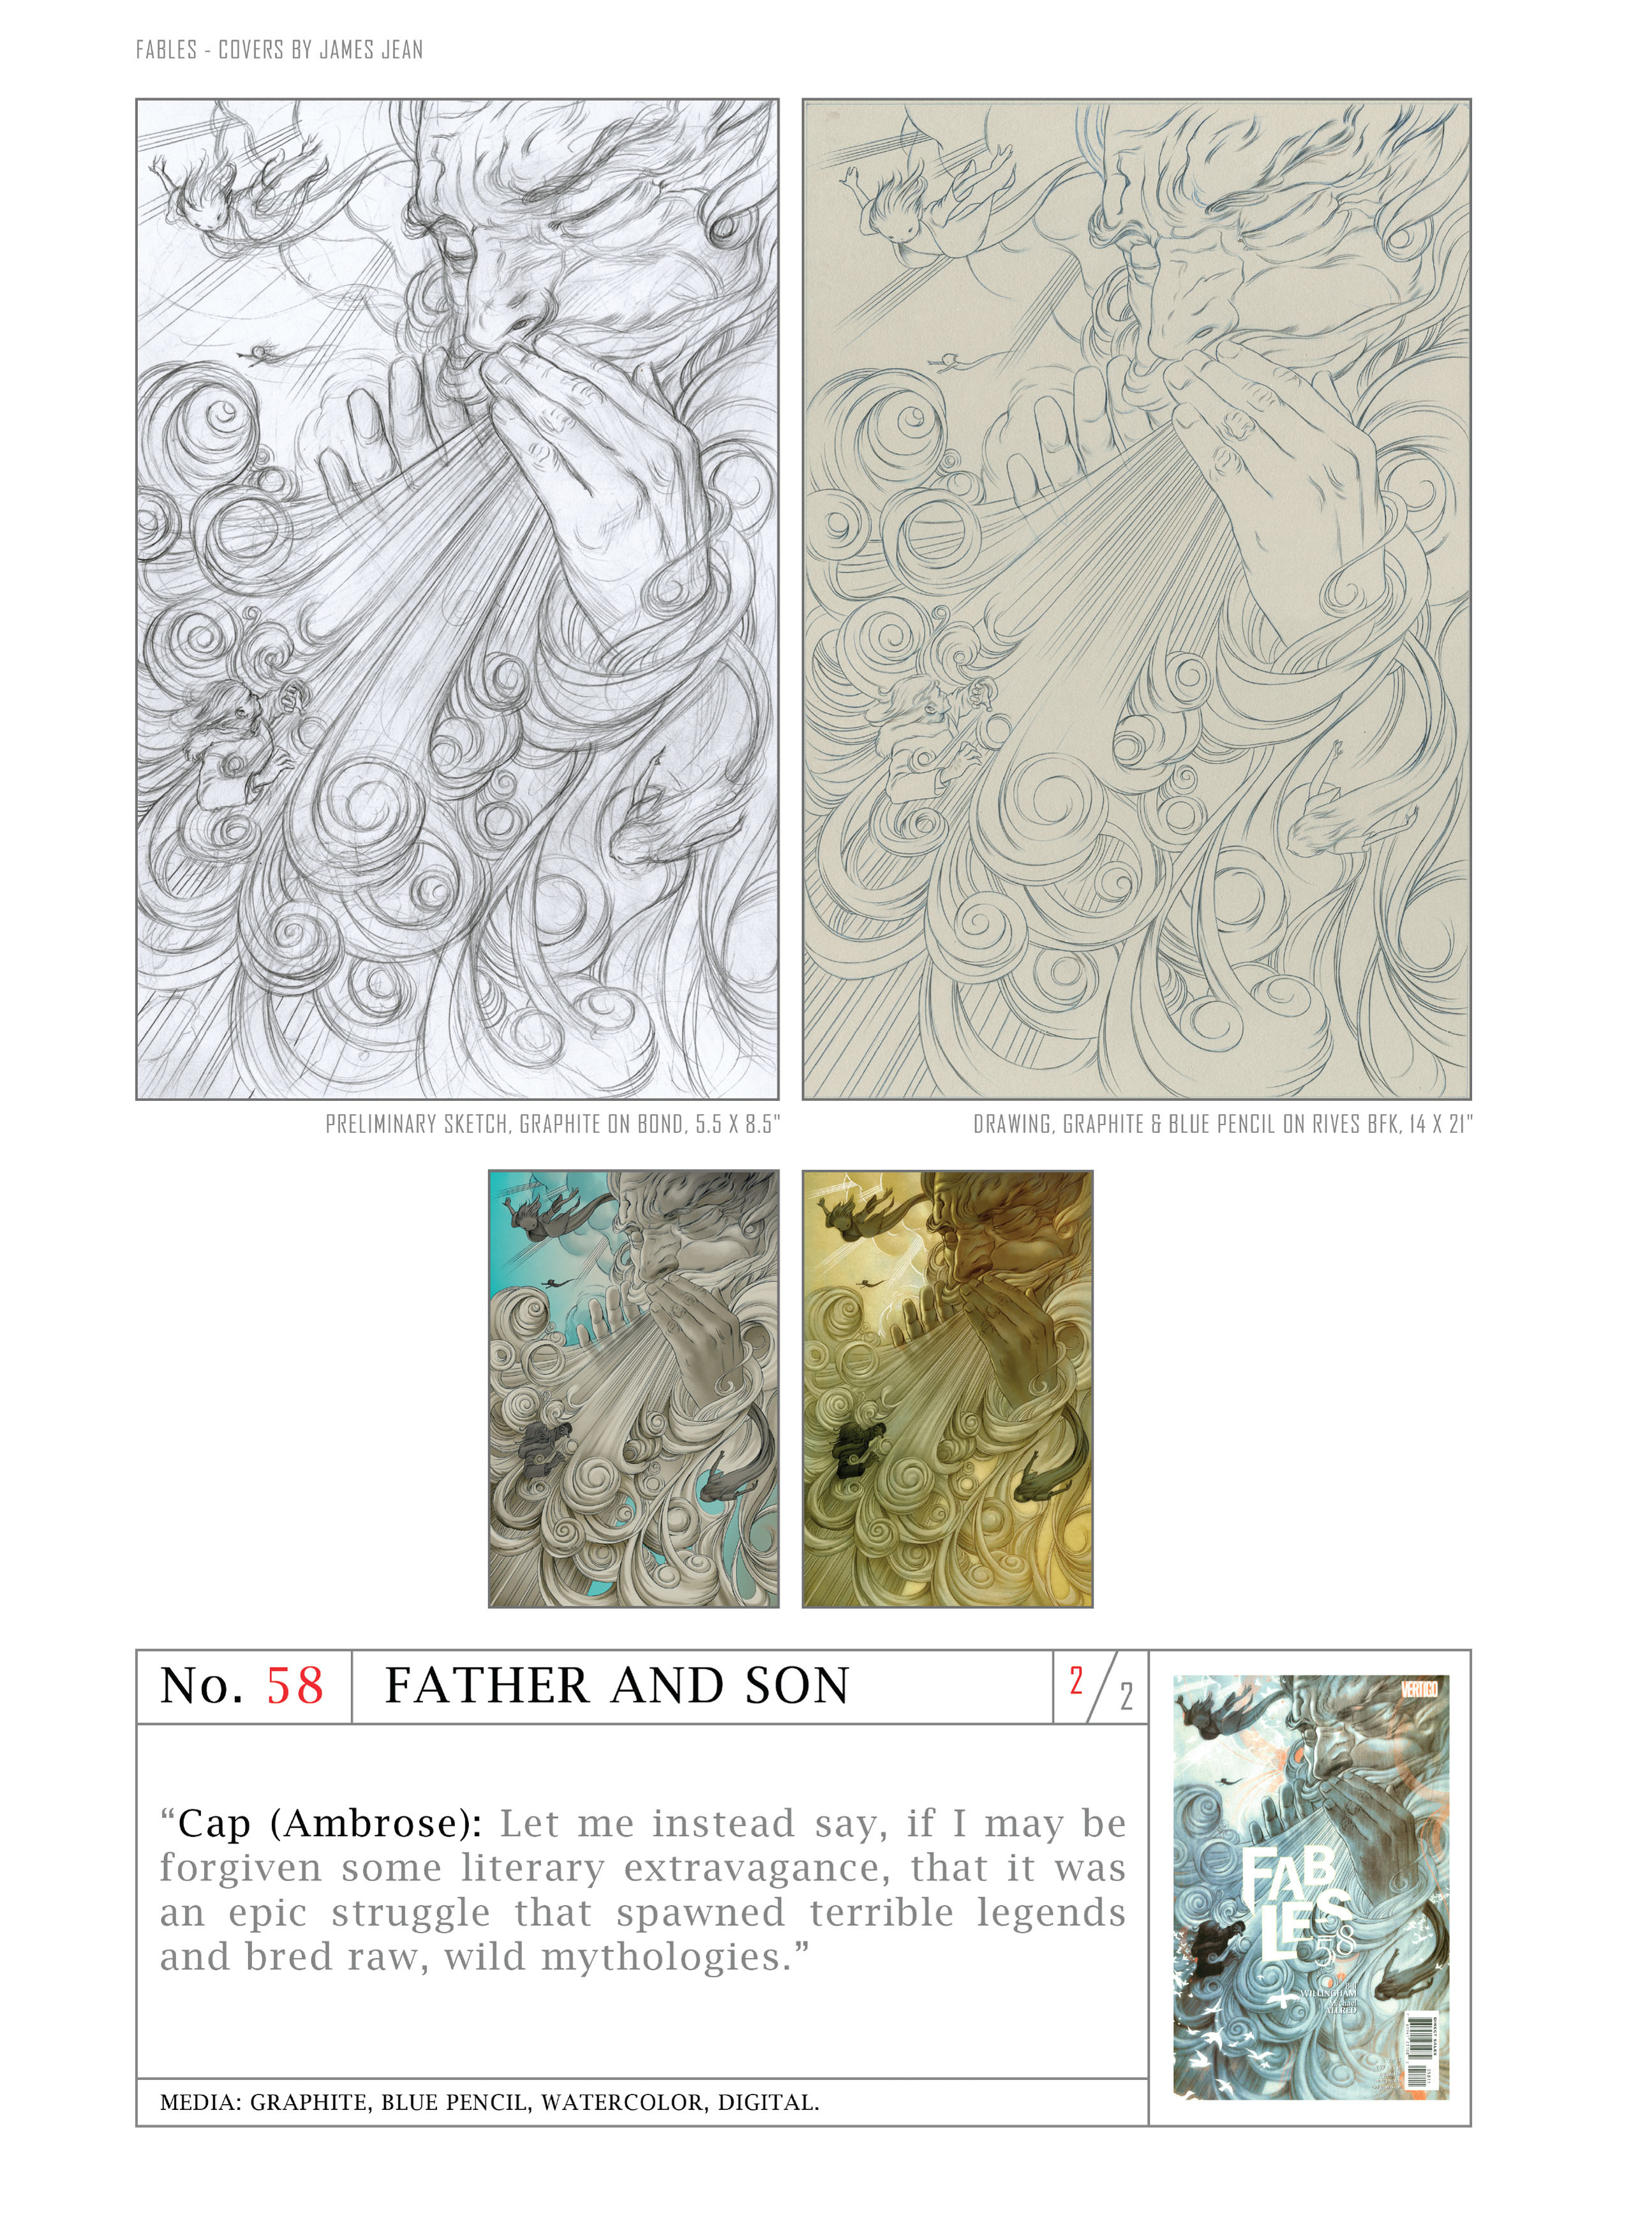 Read online Fables: Covers by James Jean comic -  Issue # TPB (Part 2) - 46